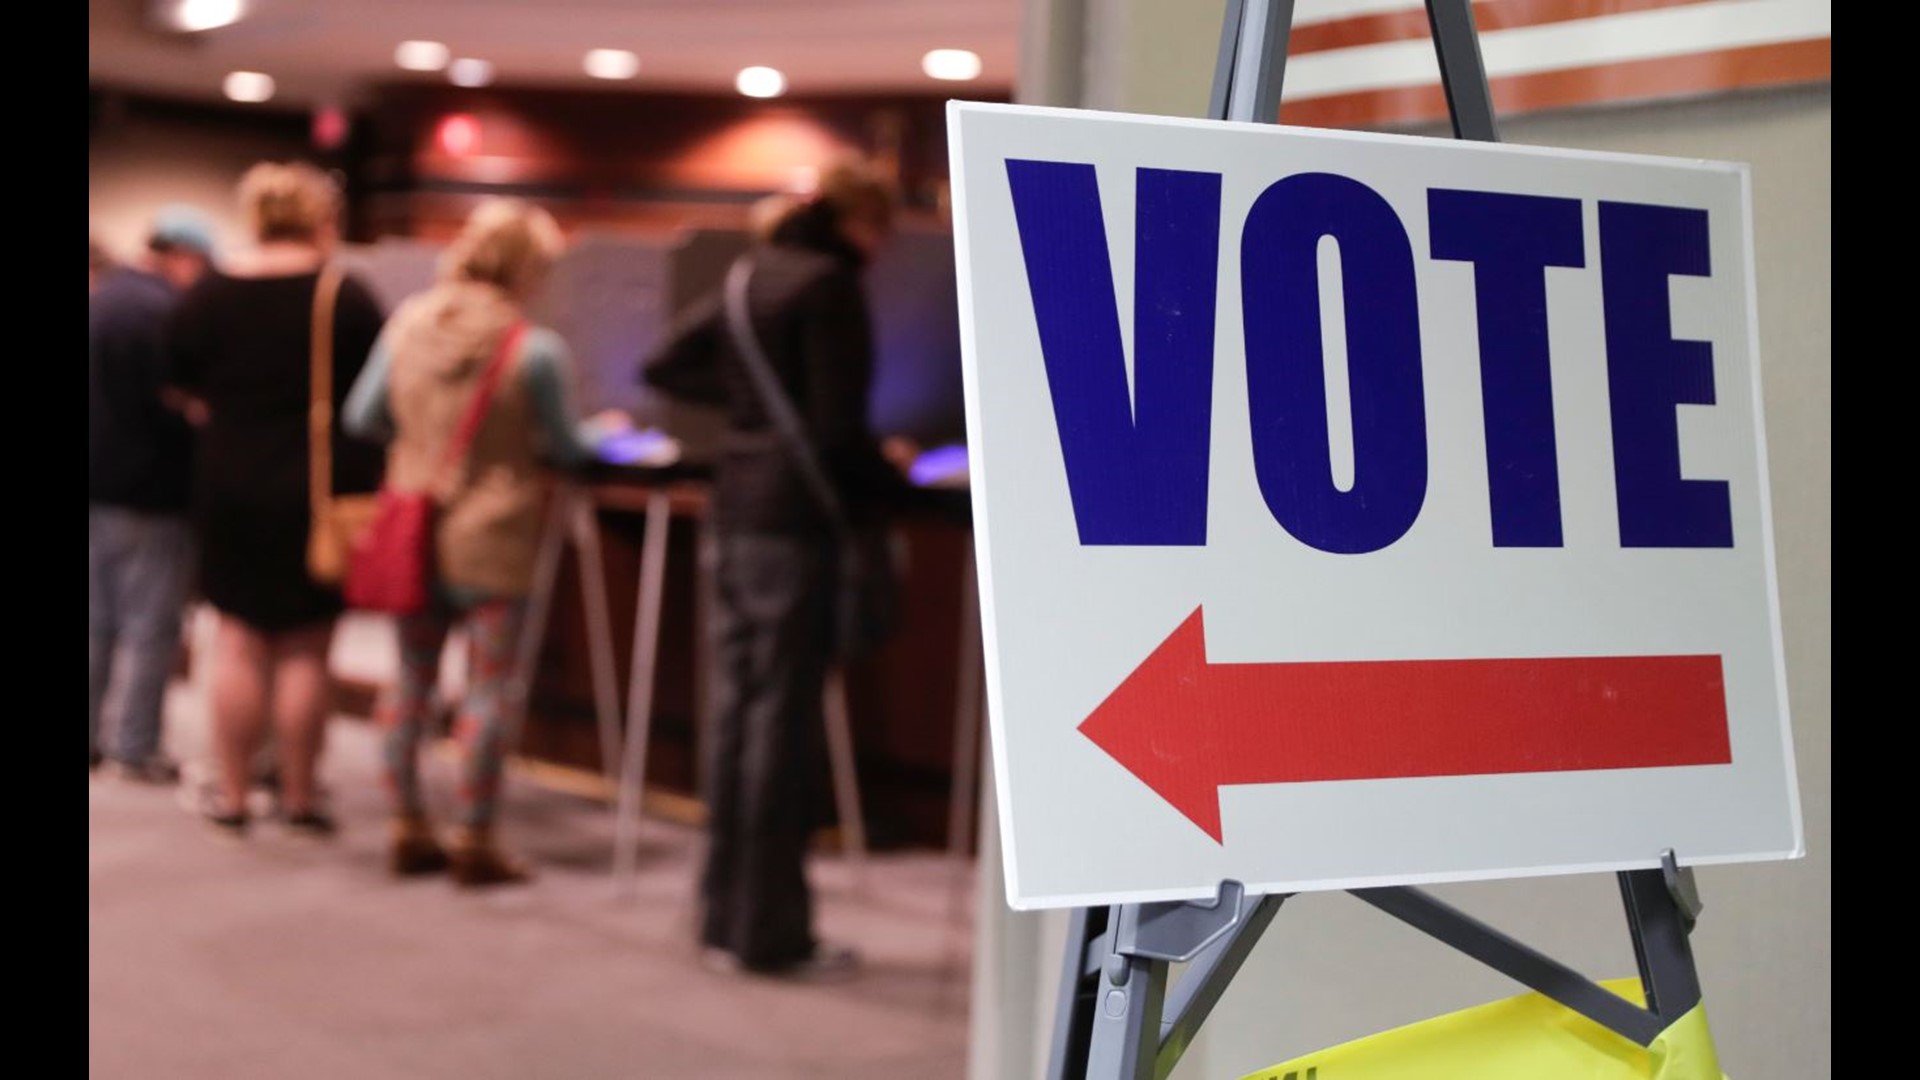 Central Ohio Voters Guide What's on your ballot? March Primary